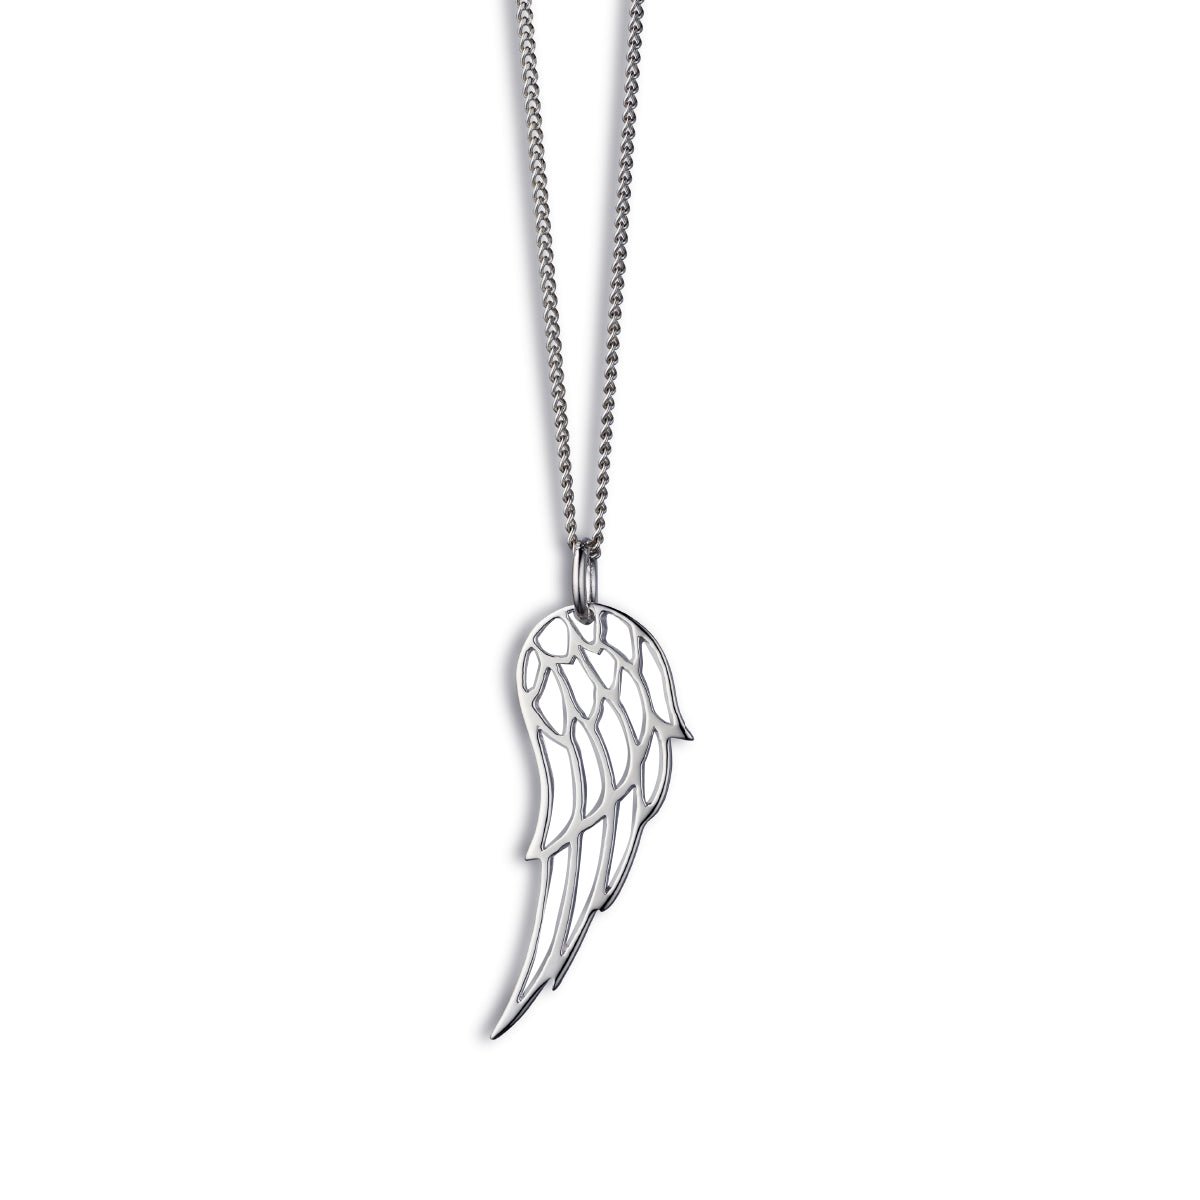 Steff Highgate Sterling Silver Angel Wing Pendant with Chain - Steffans Jewellers